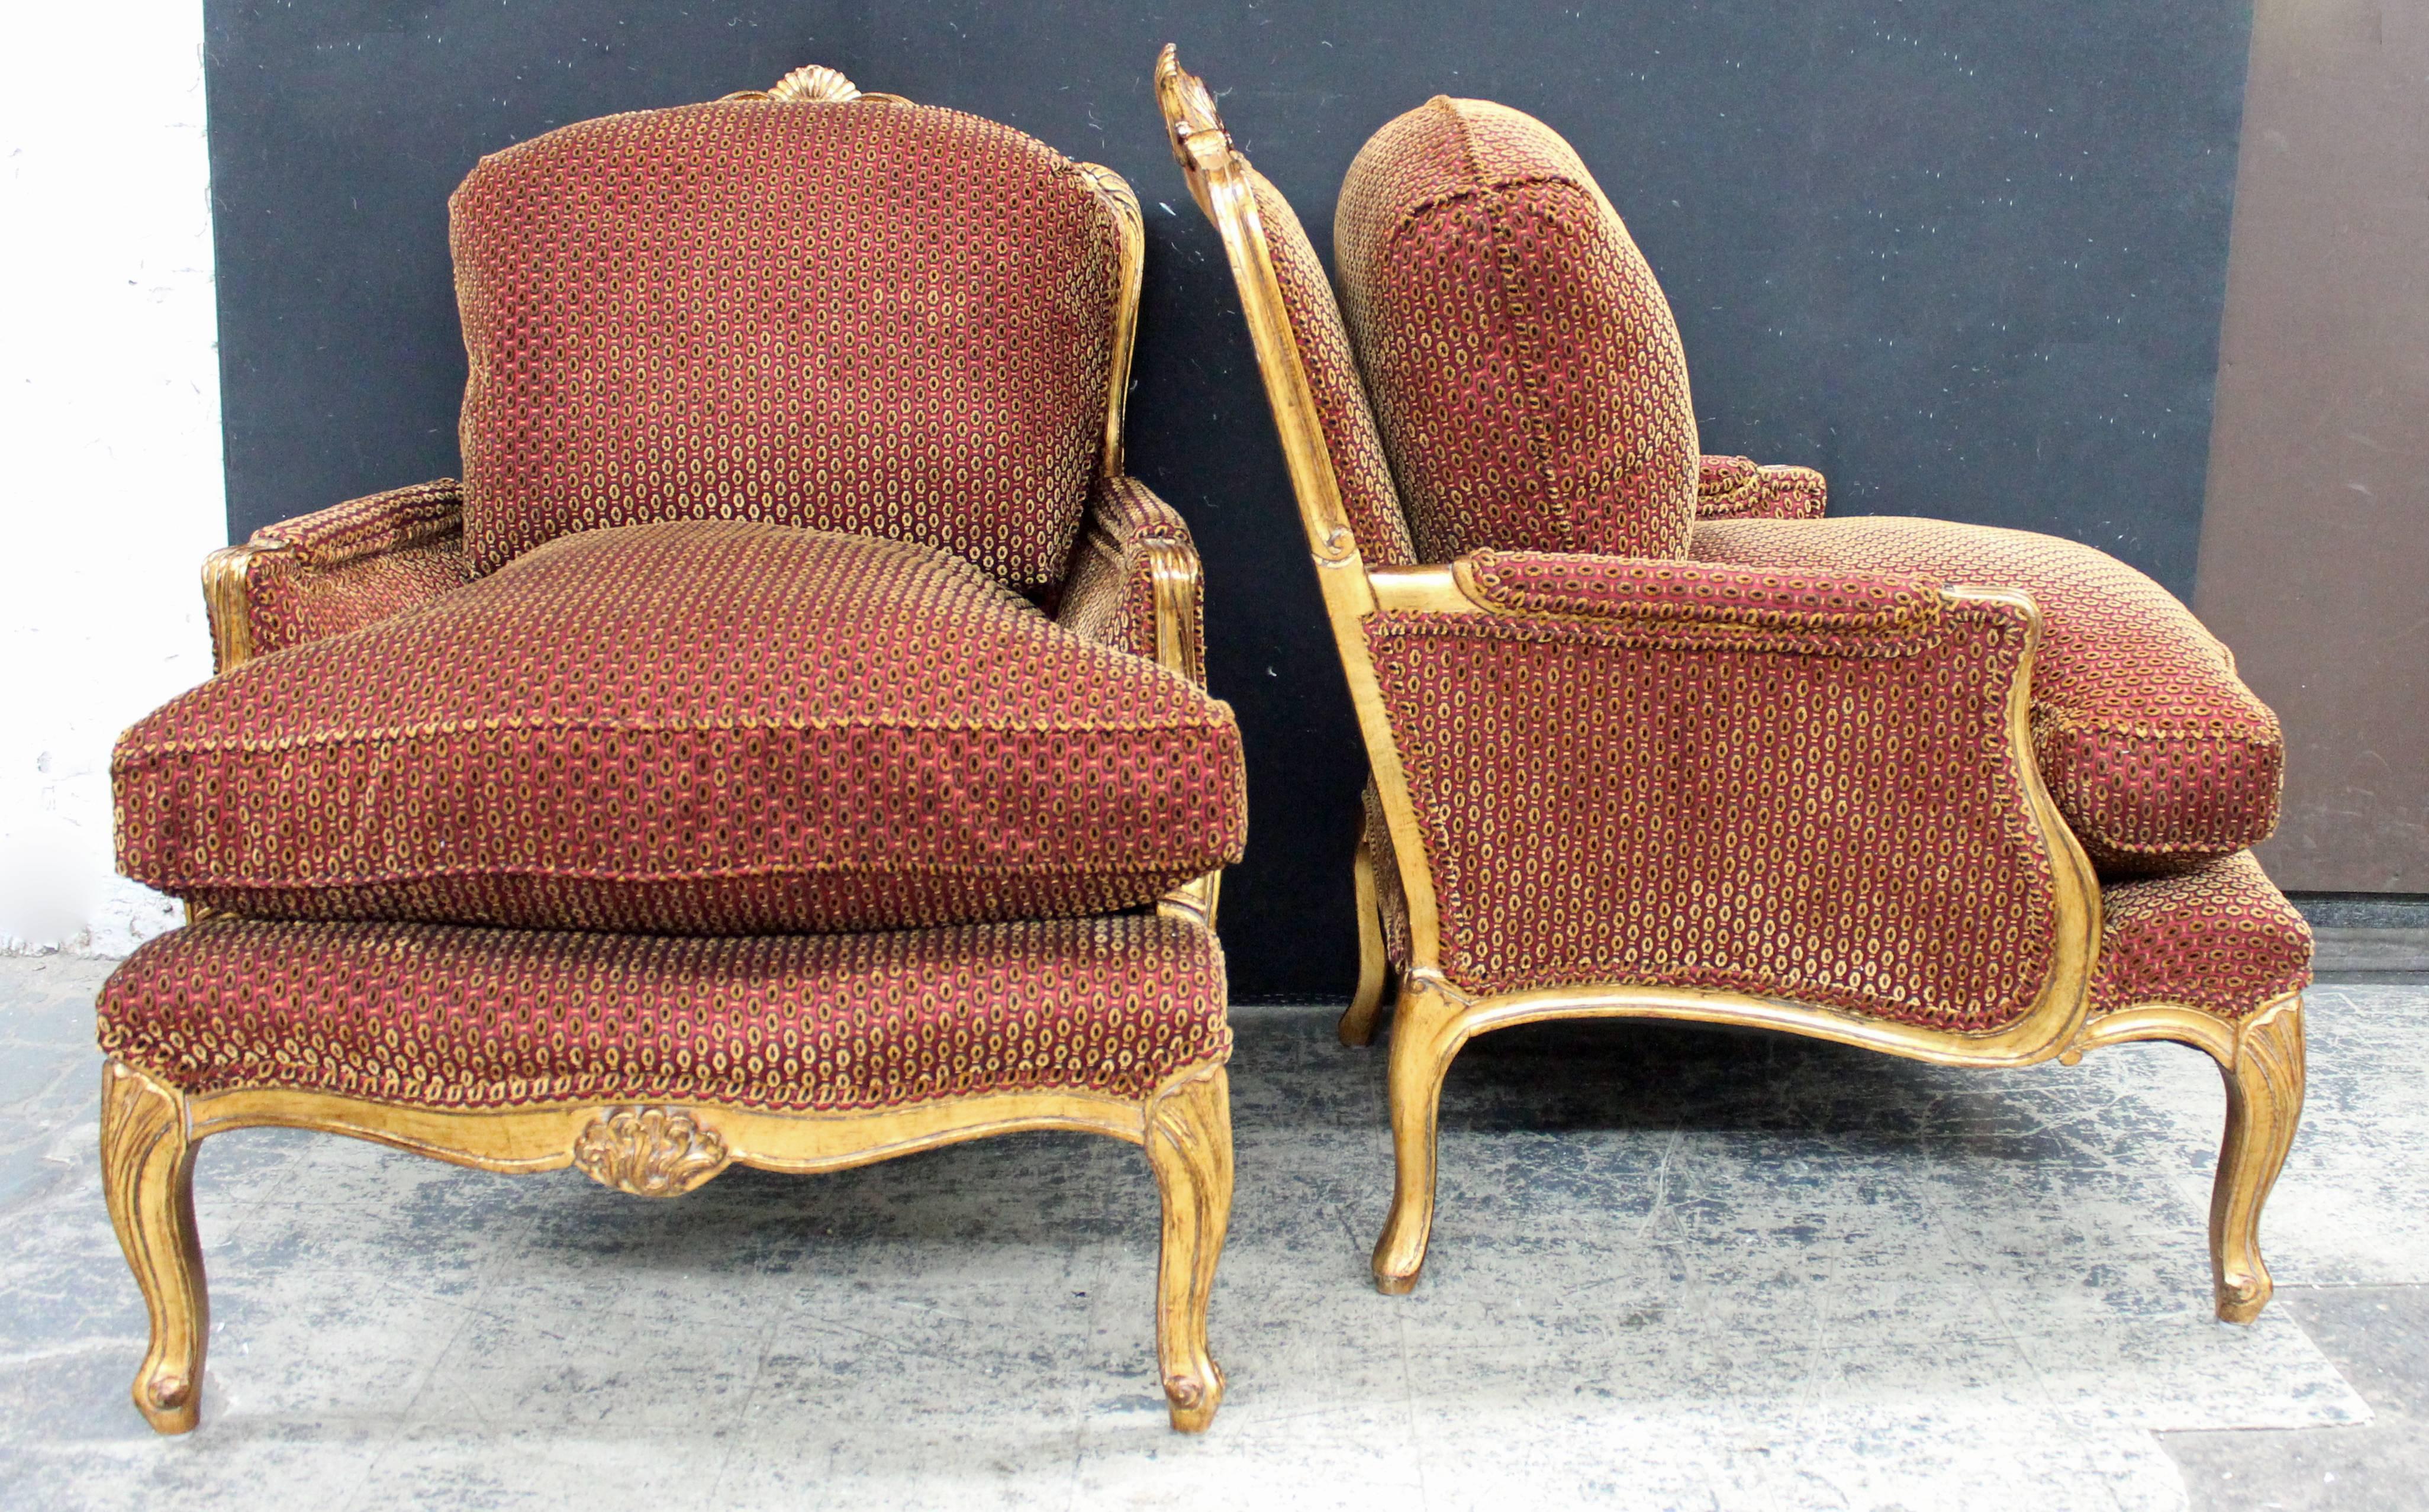 Pair of gilded French Louis XV bergères in a rich sculpted velvet. New upholstery work and fabric. Arm height is 22